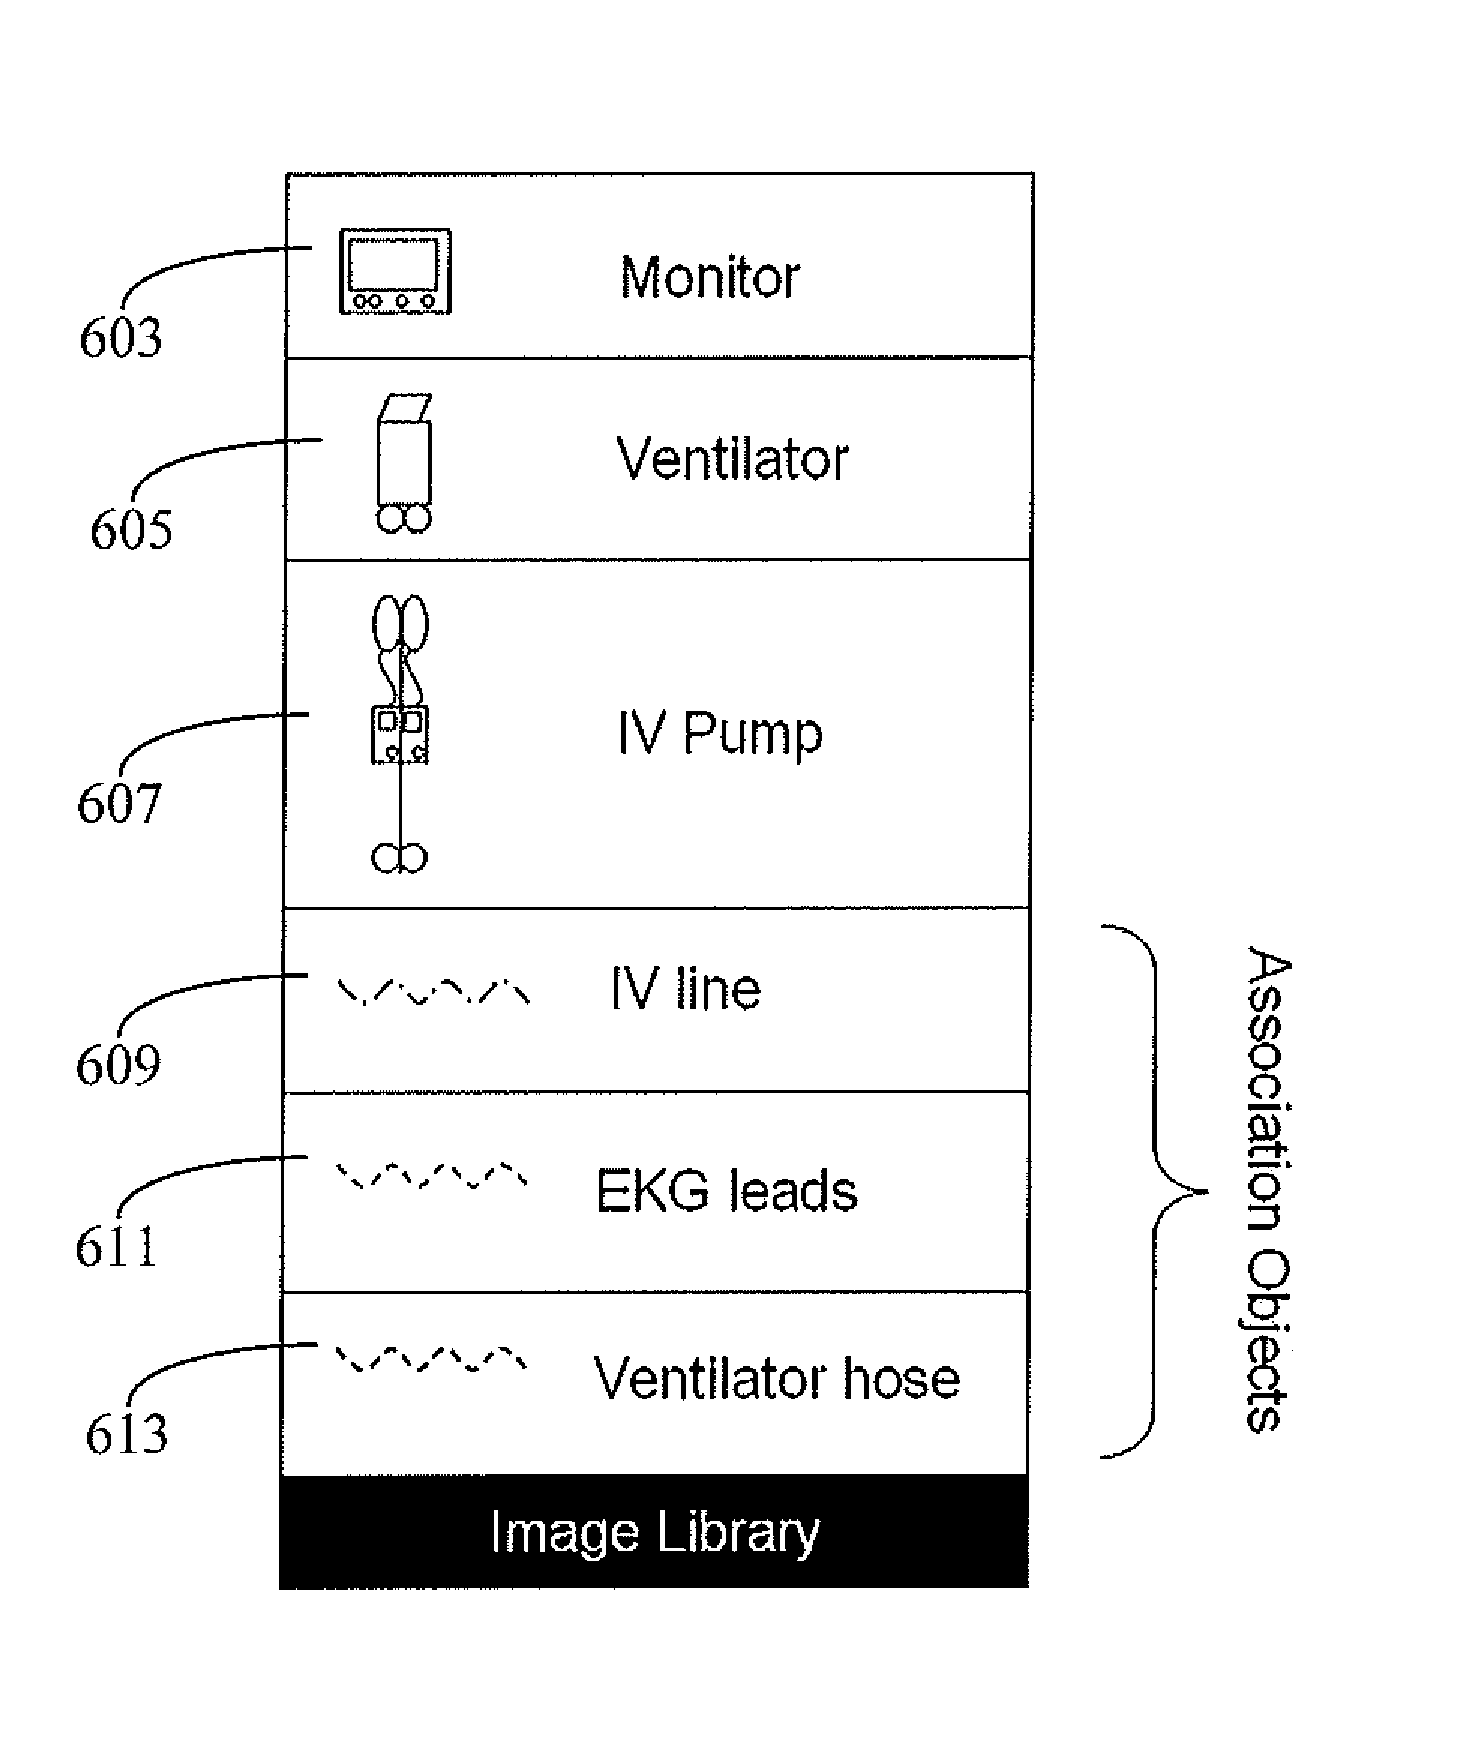 Automatic patient and device recognition and association system